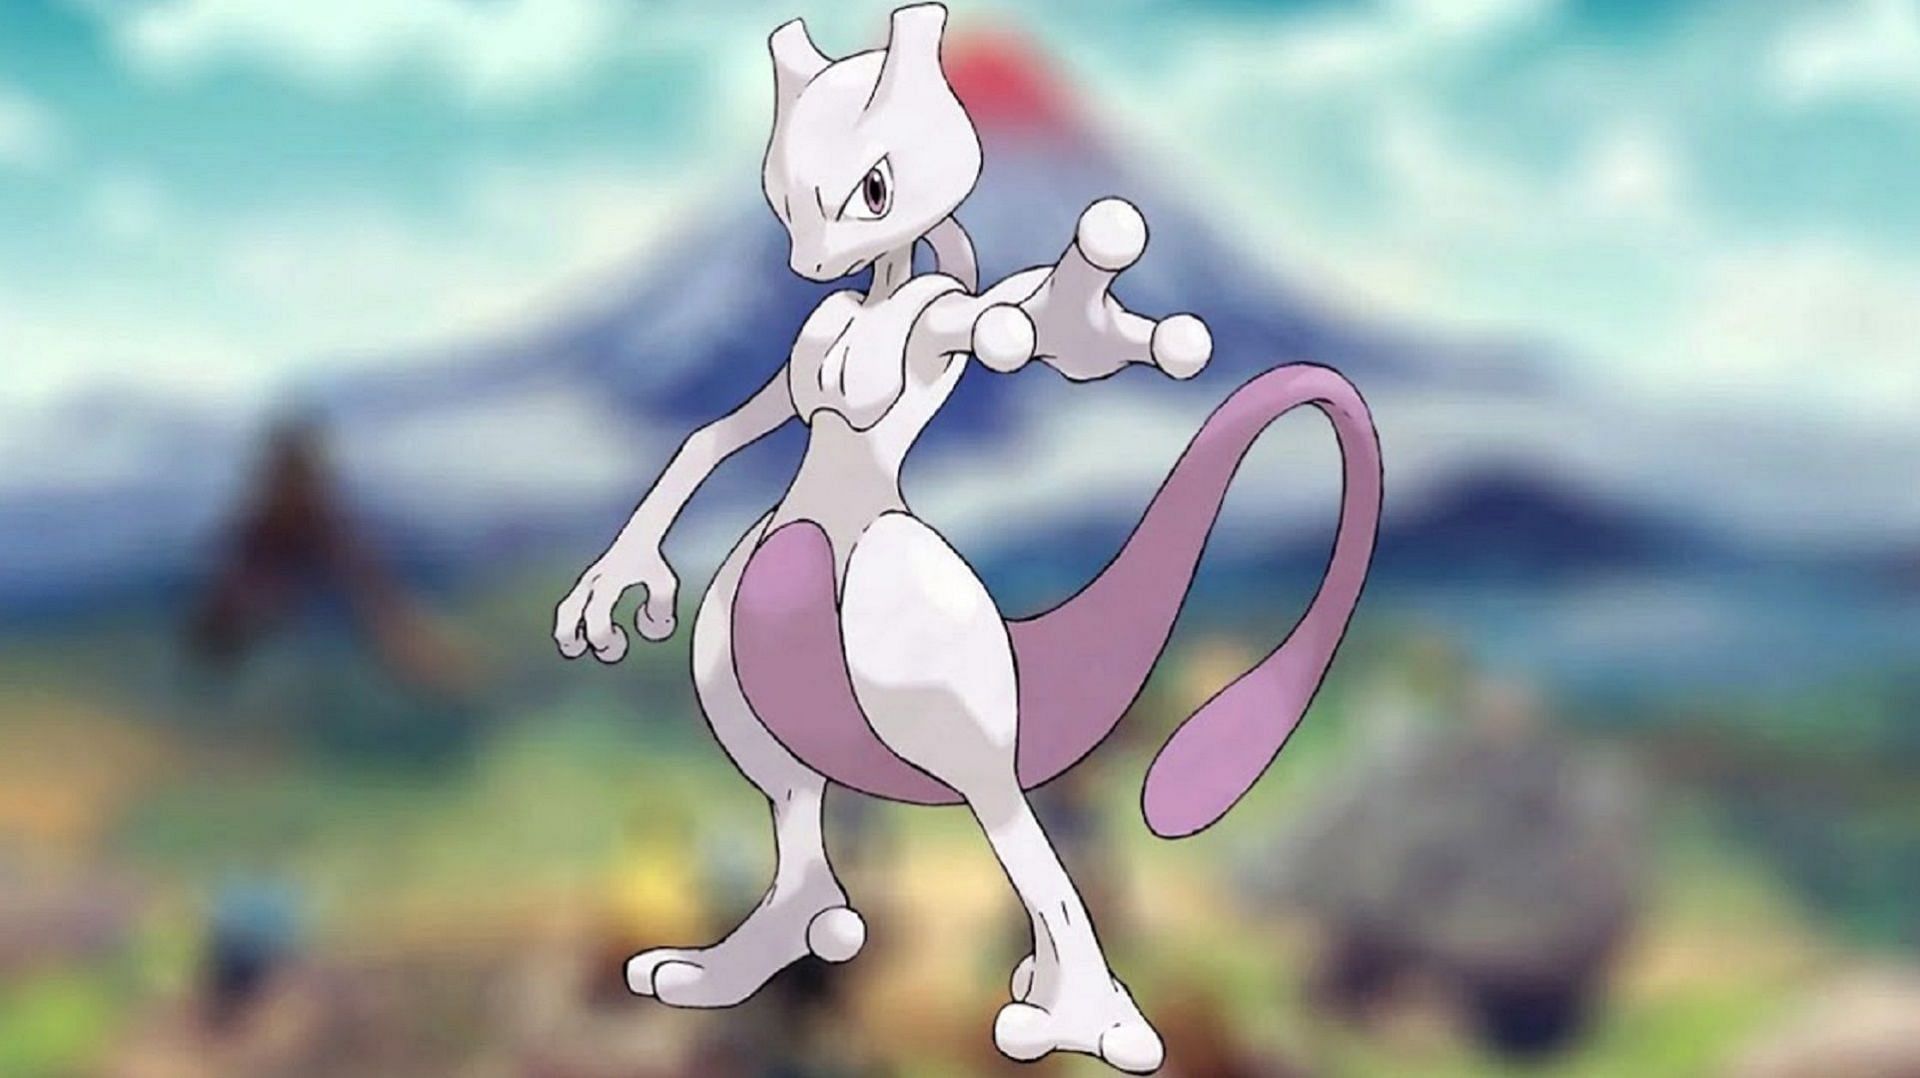 Official game artwork for Mewtwo in recent franchise titles (Image via Game Freak)